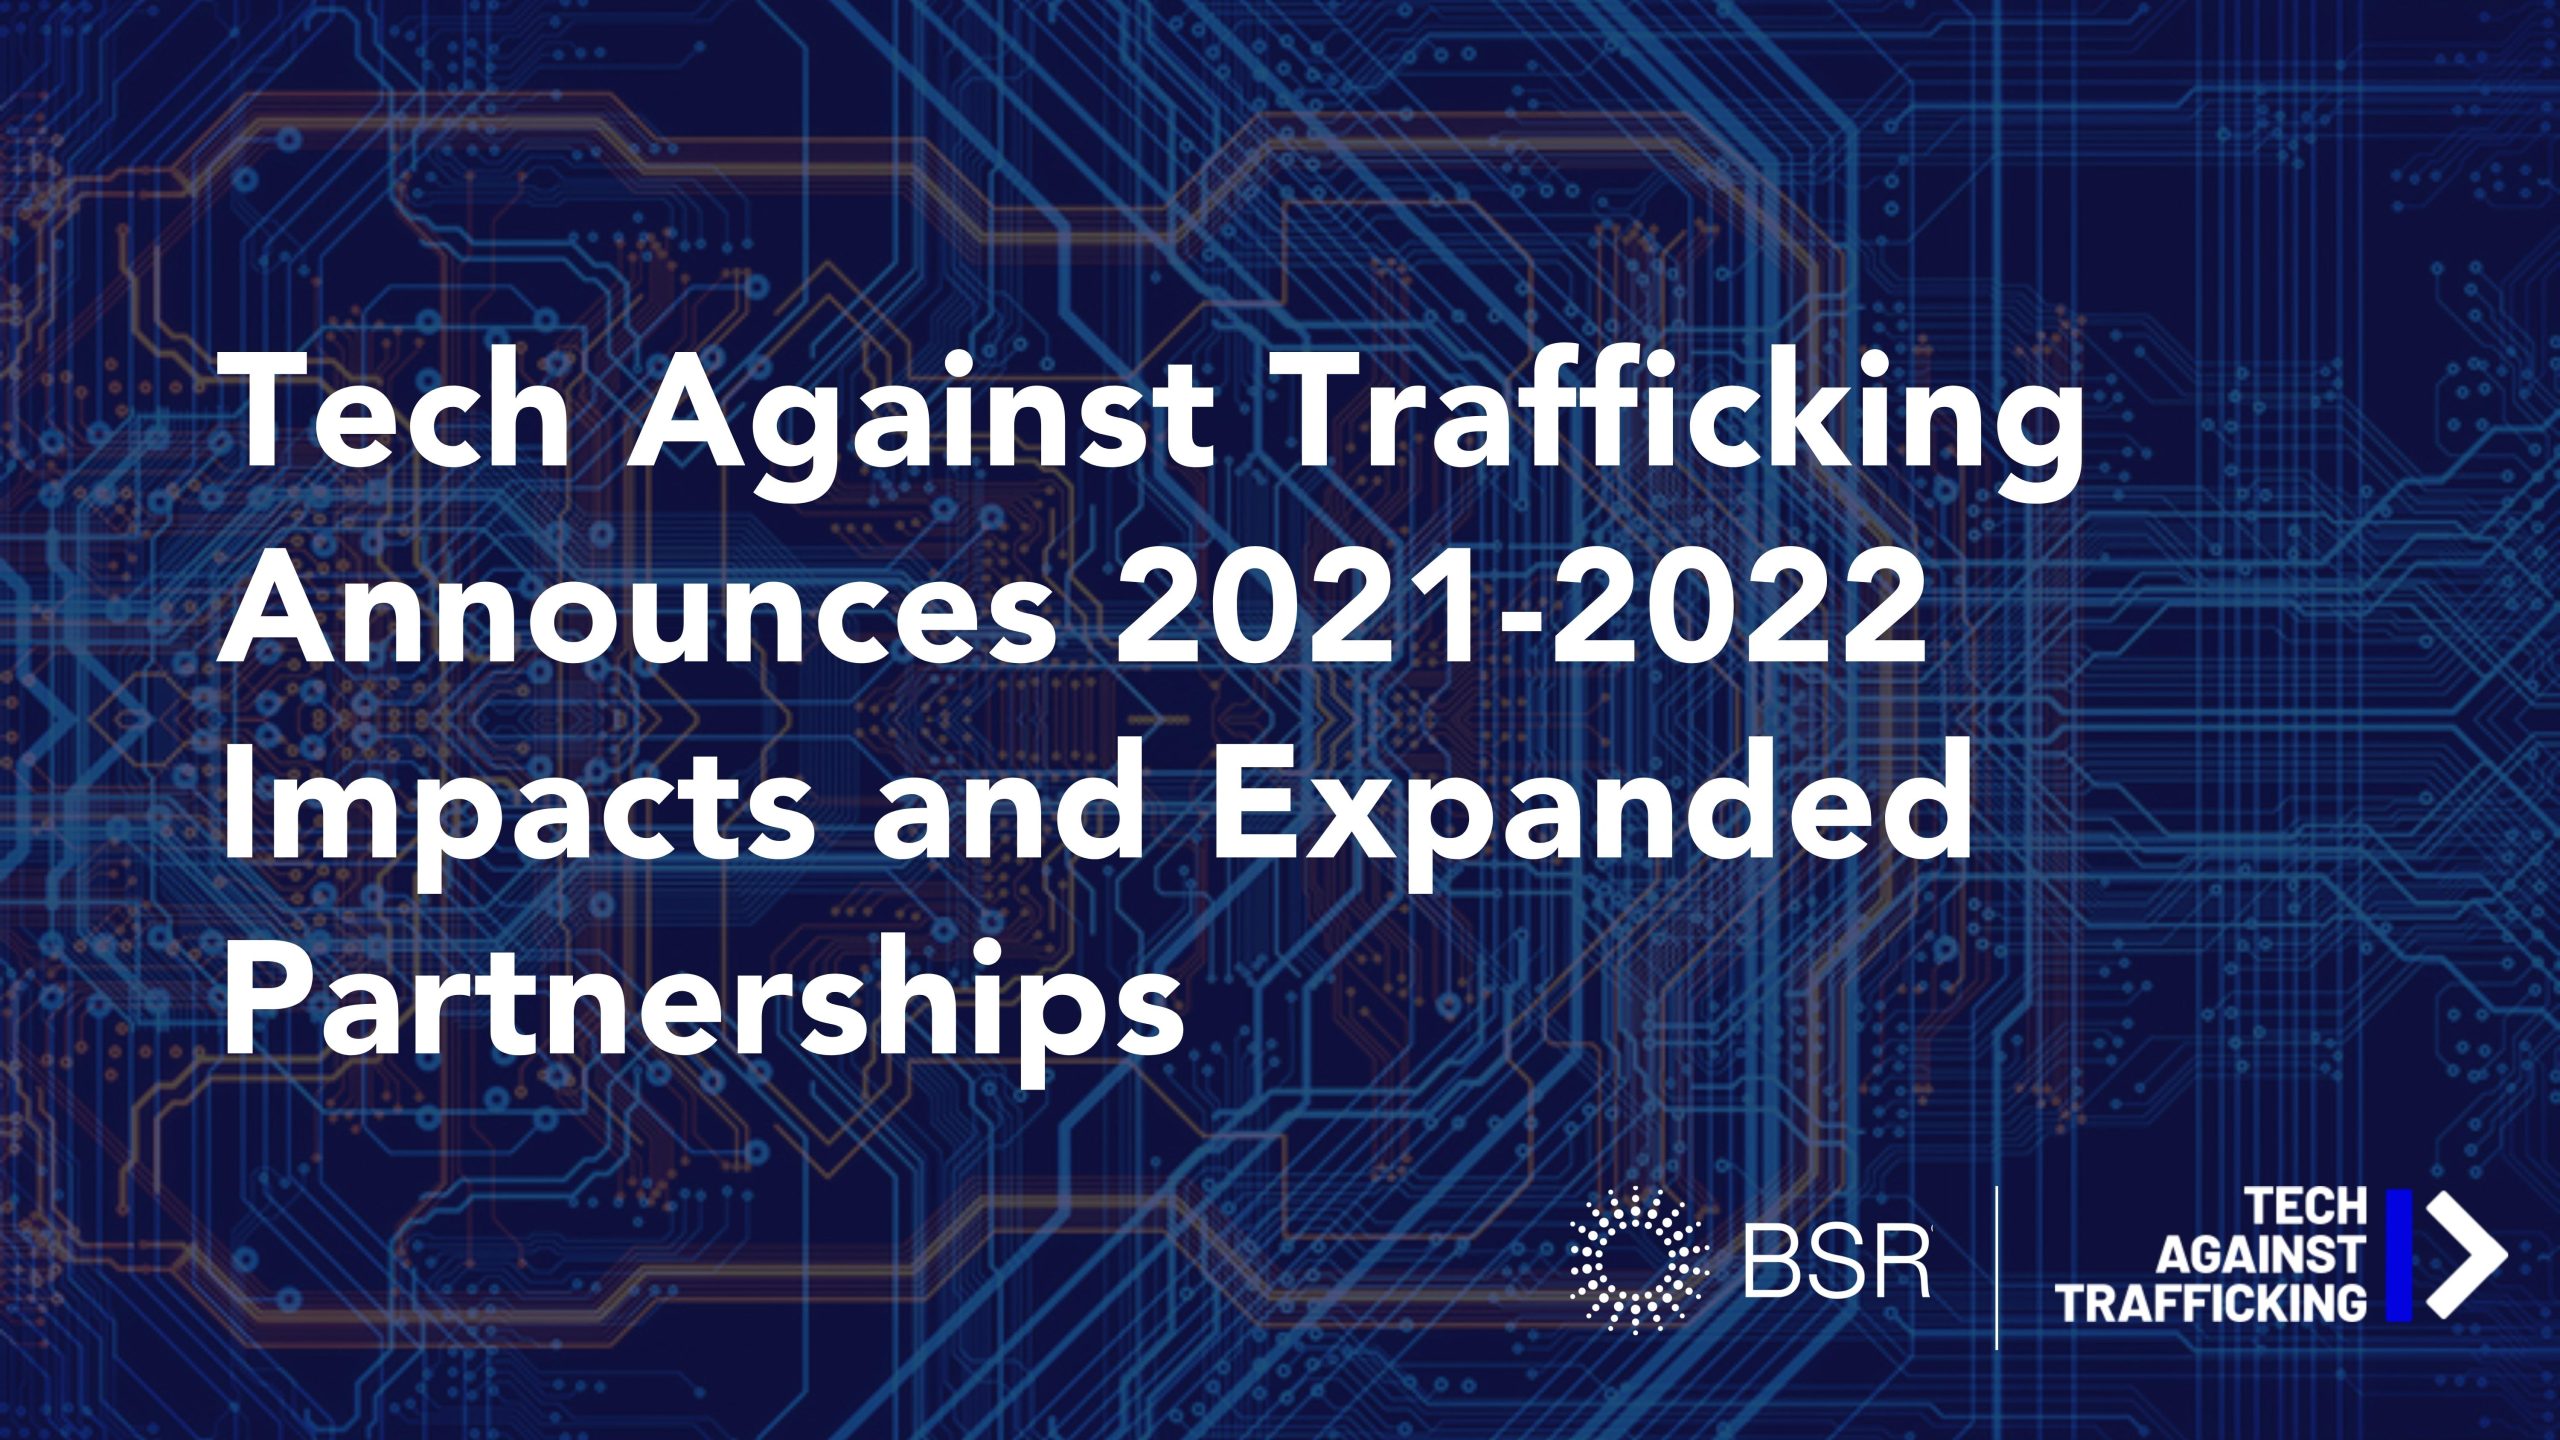 Tech Against Trafficking Announces 2021-2022 Impacts and Expanded Partnerships with Google and Meta